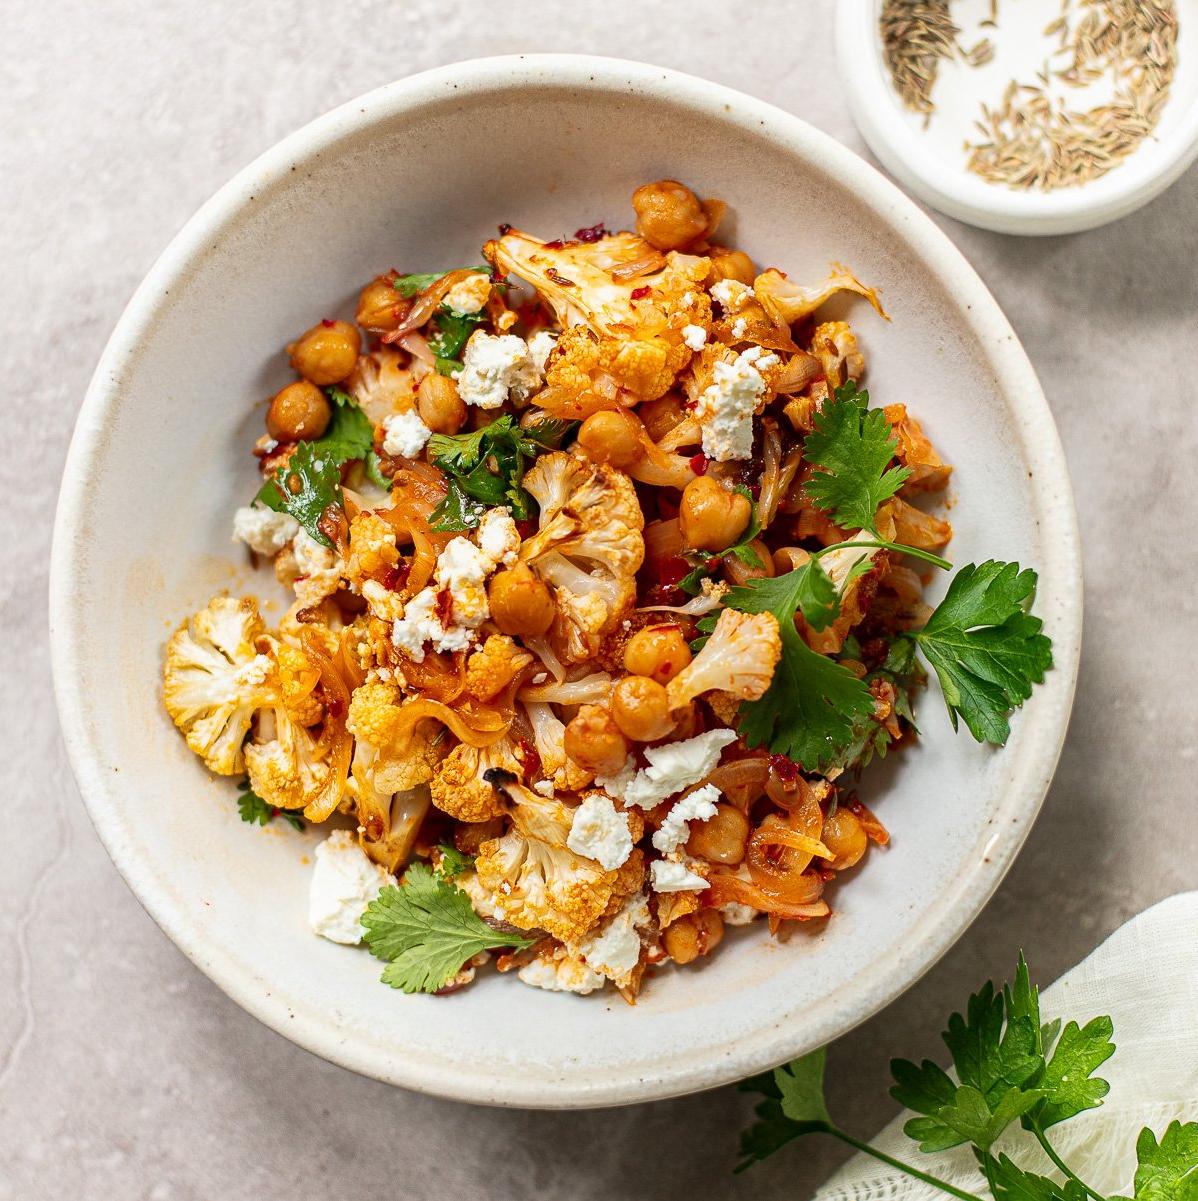  Our roasted cauliflower with harissa sauce recipe is sure to make your mouth water